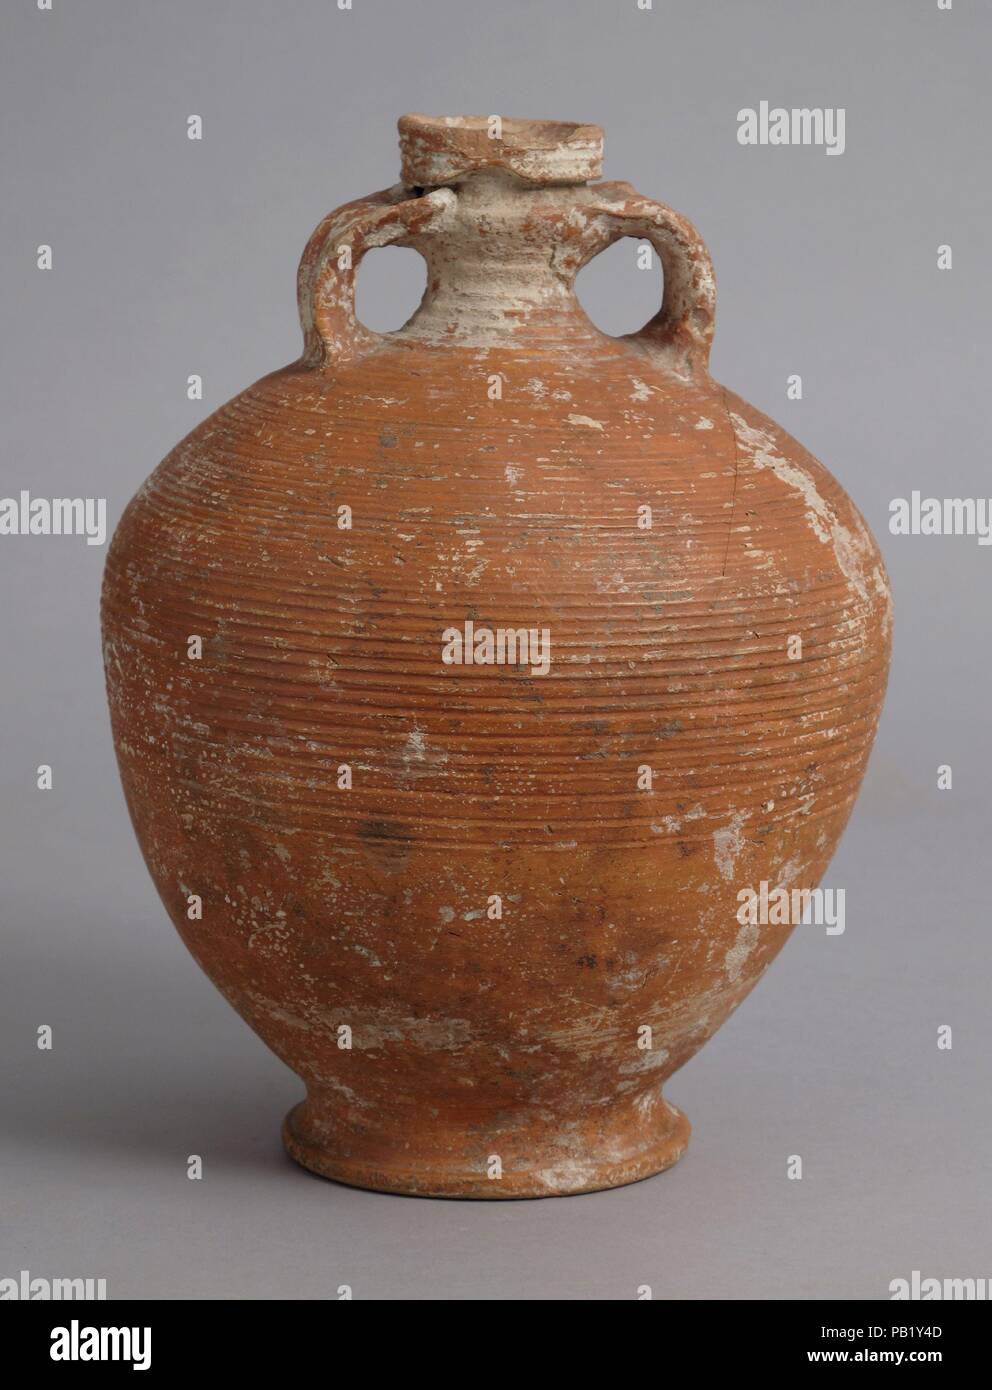 Ribbed Amphora. Culture: Coptic. Dimensions: Overall: 10 1/16 x 7 5/8 in. (25.5 x 19.3 cm). Date: 580-640. Museum: Metropolitan Museum of Art, New York, USA. Stock Photo